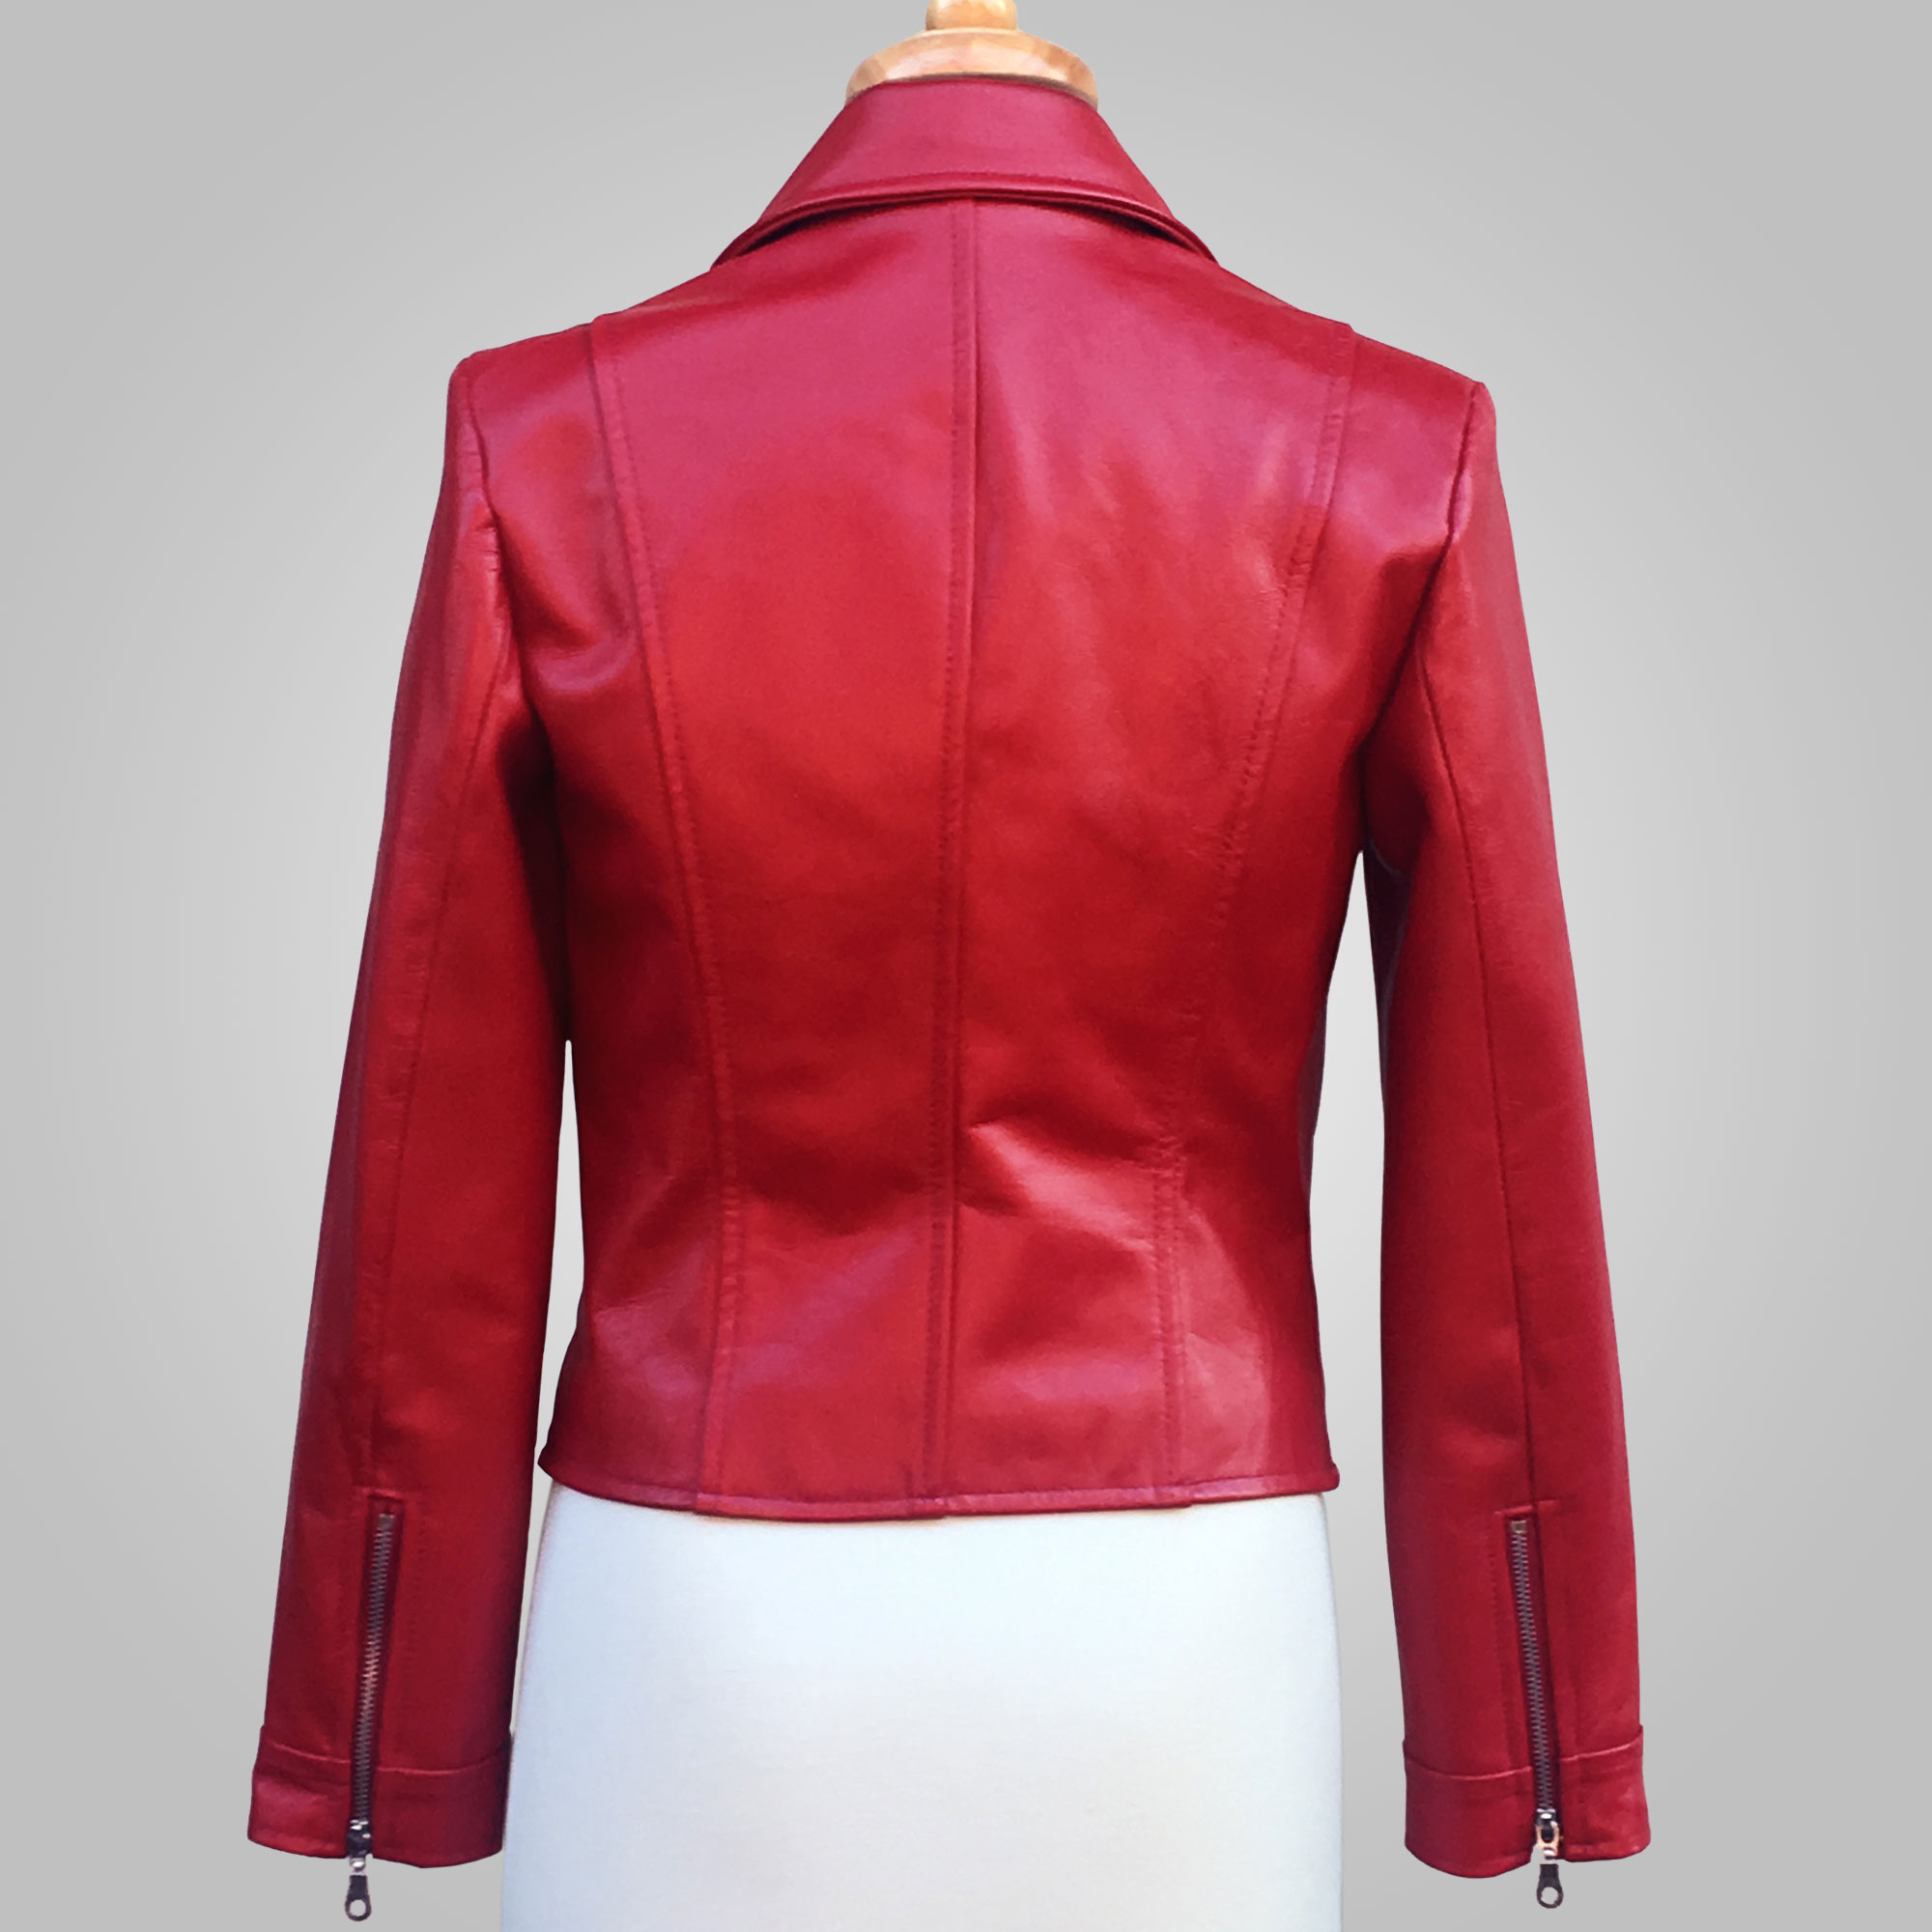 Red Leather Jacket - Red Rock 167 - L'Aurore Leather Jacket